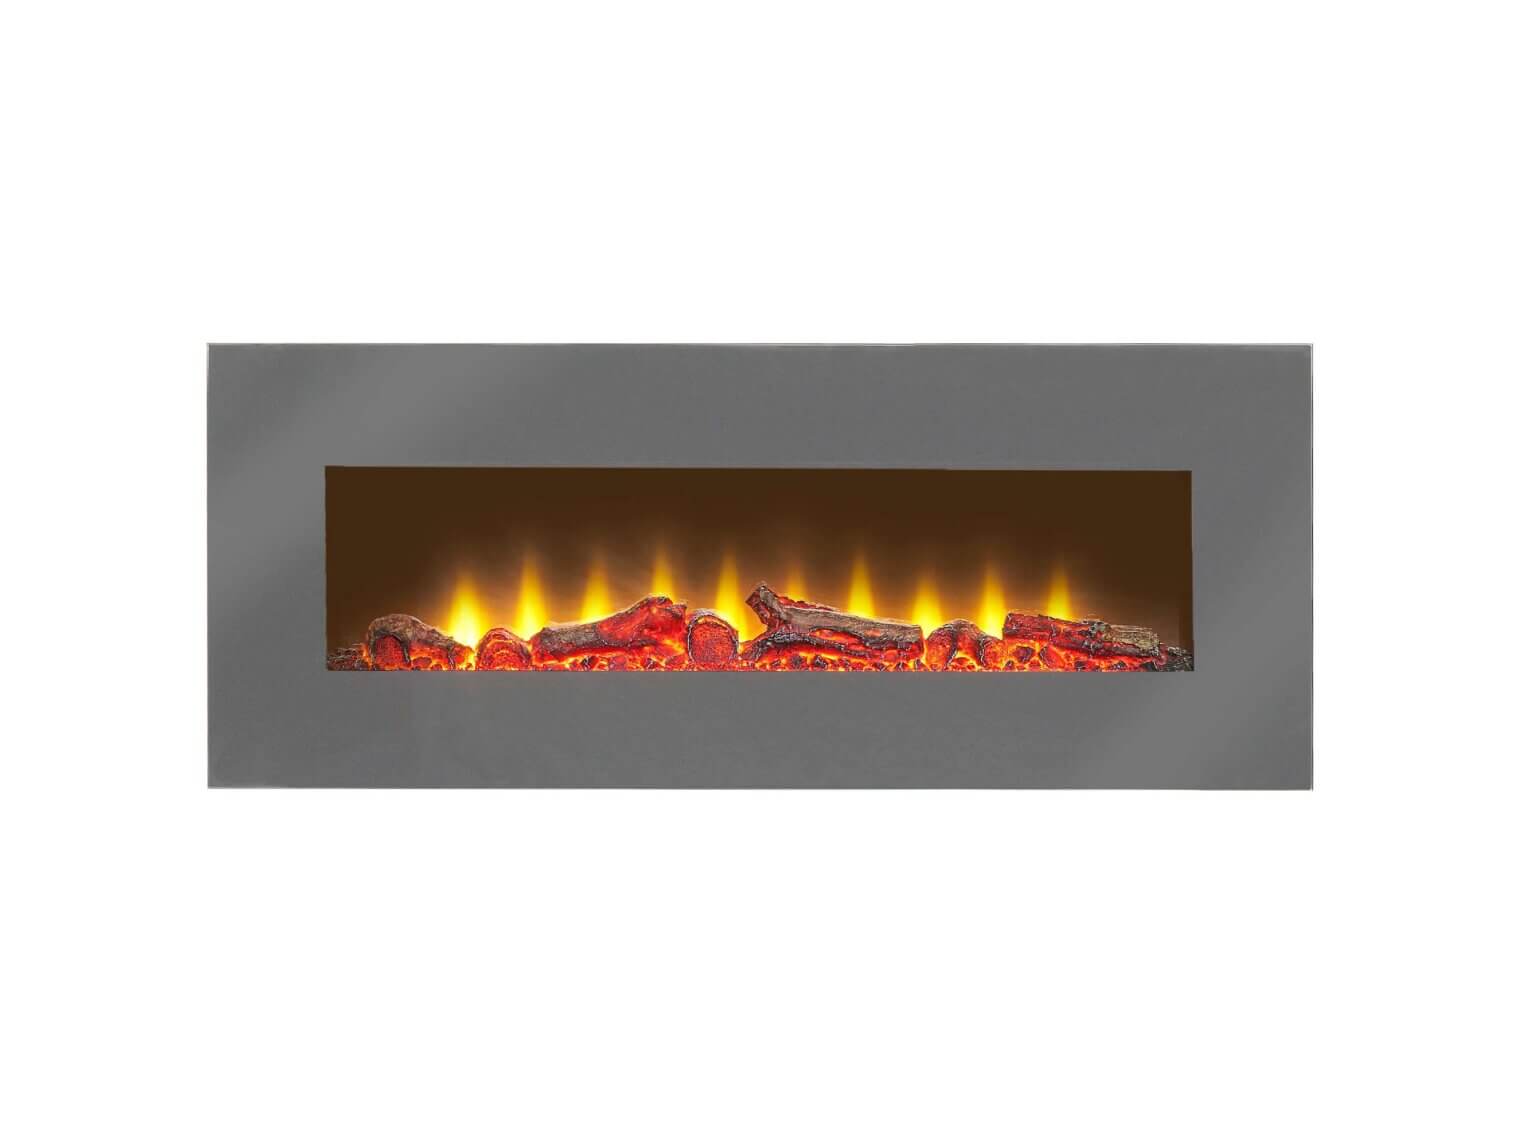 Sureflame WM-9505 Electric Wall Mounted Fire with Remote in Grey, 42 Inch - Glowing Flames